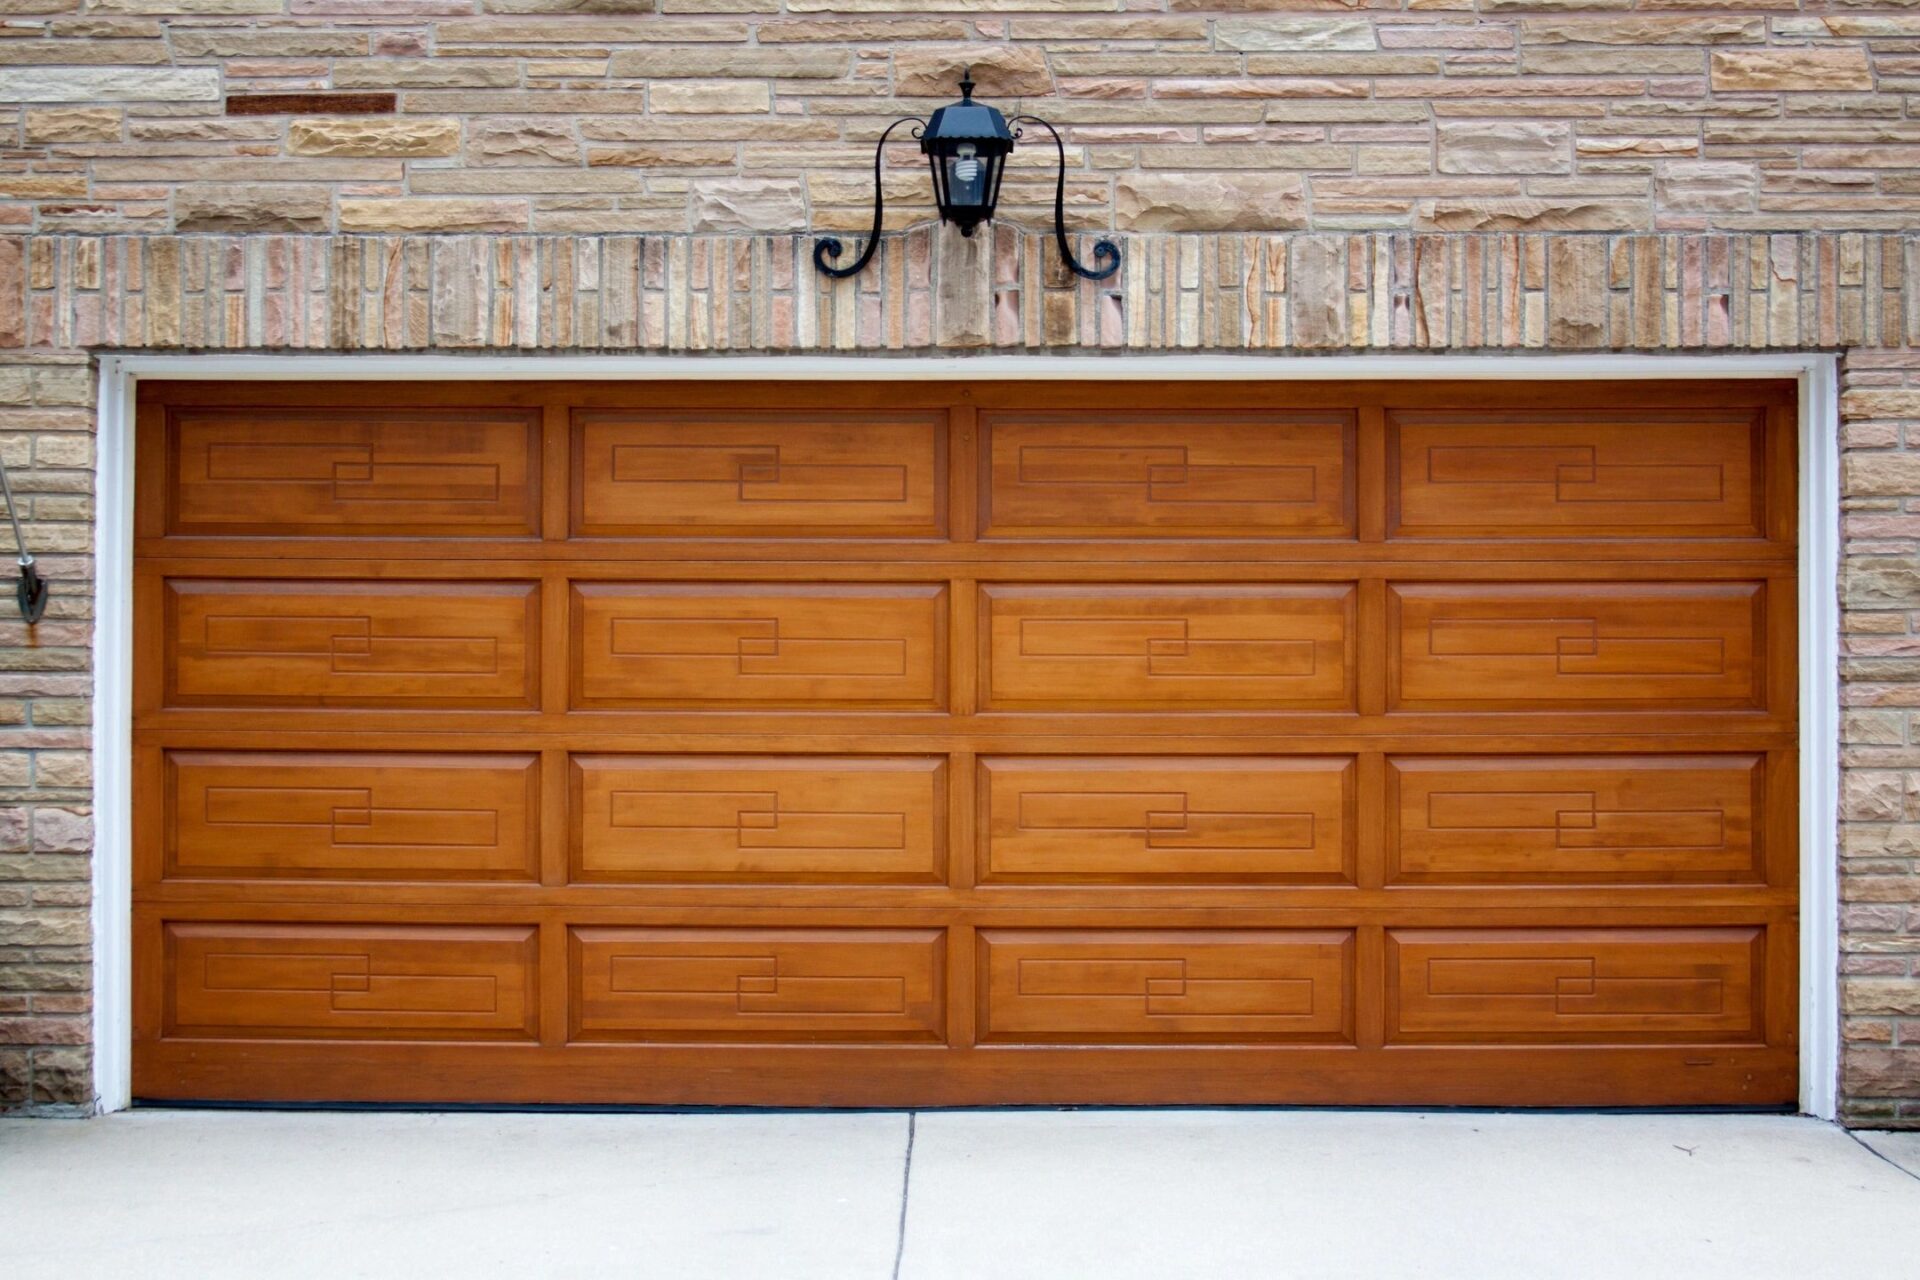 A garage door that is closed and open.